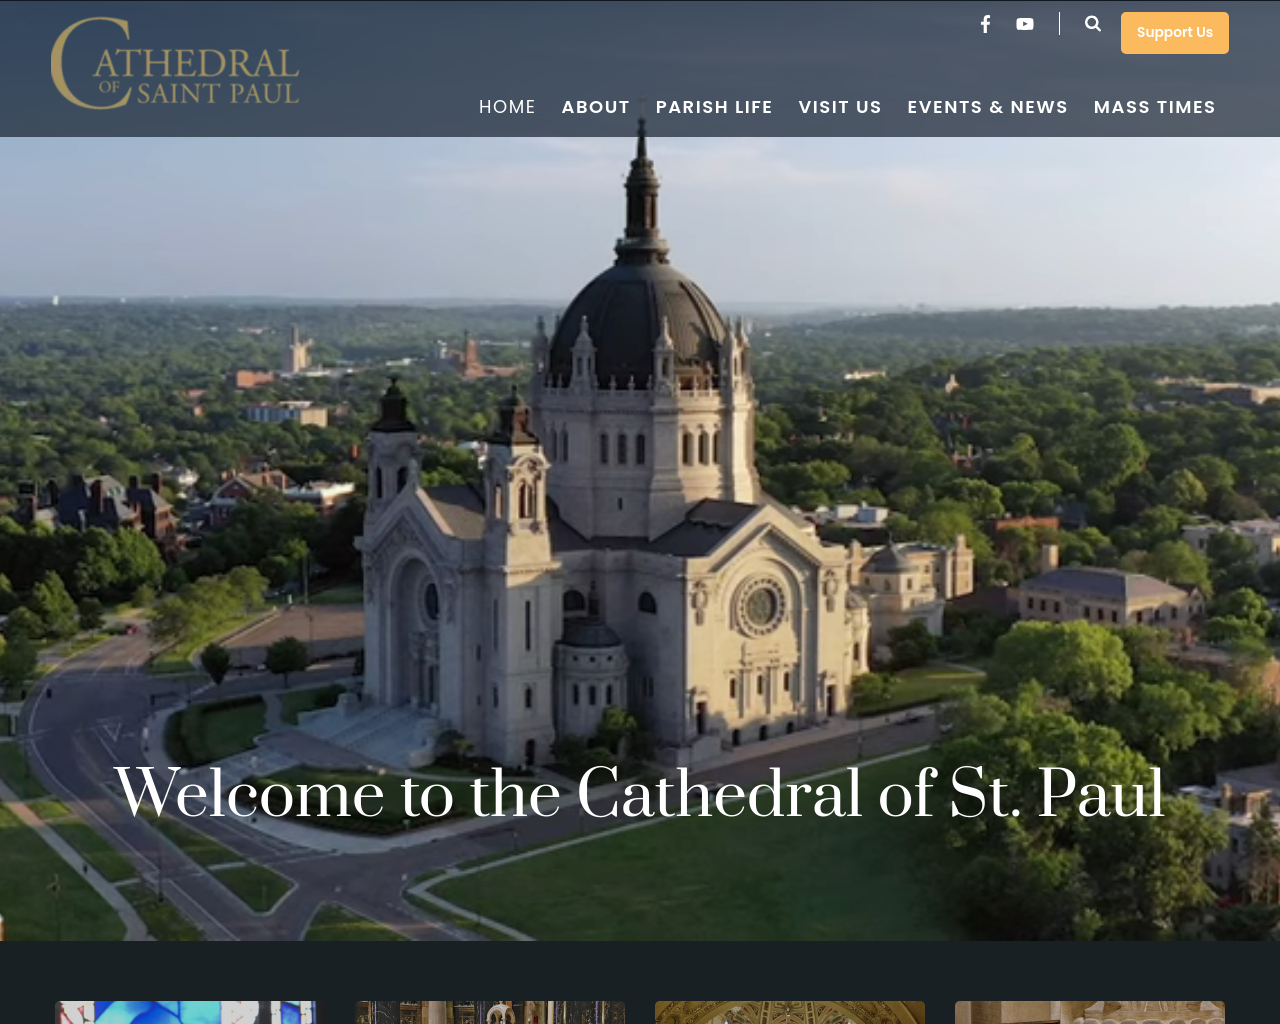 cathedralsaintpaul.org